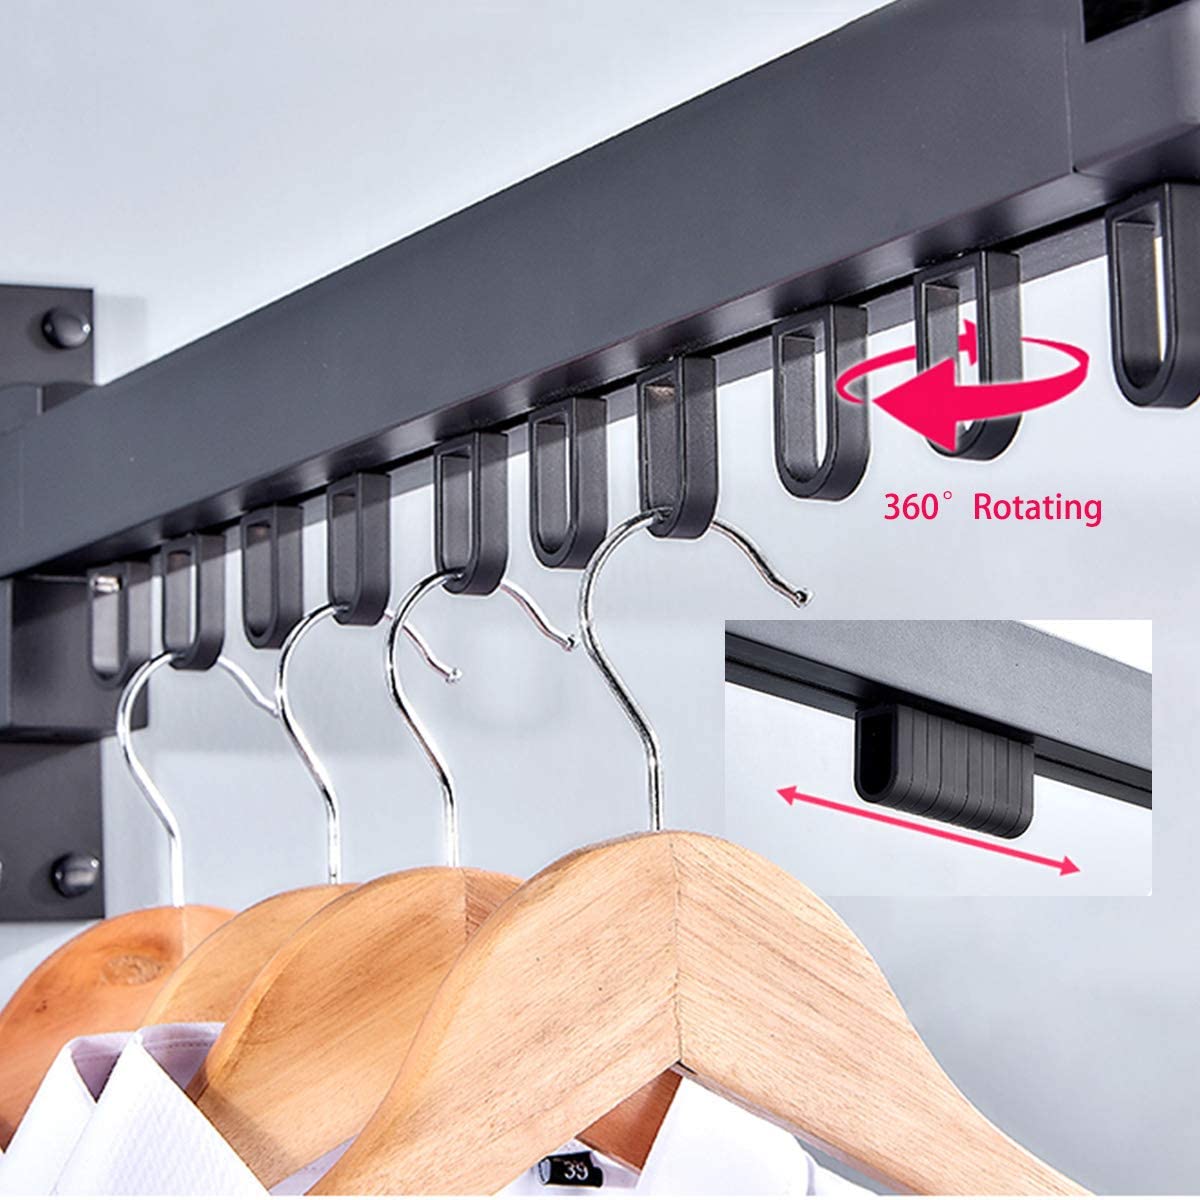 Adjustable and Retrackable Space-Saver Clothes Drying Rack – good idea ...